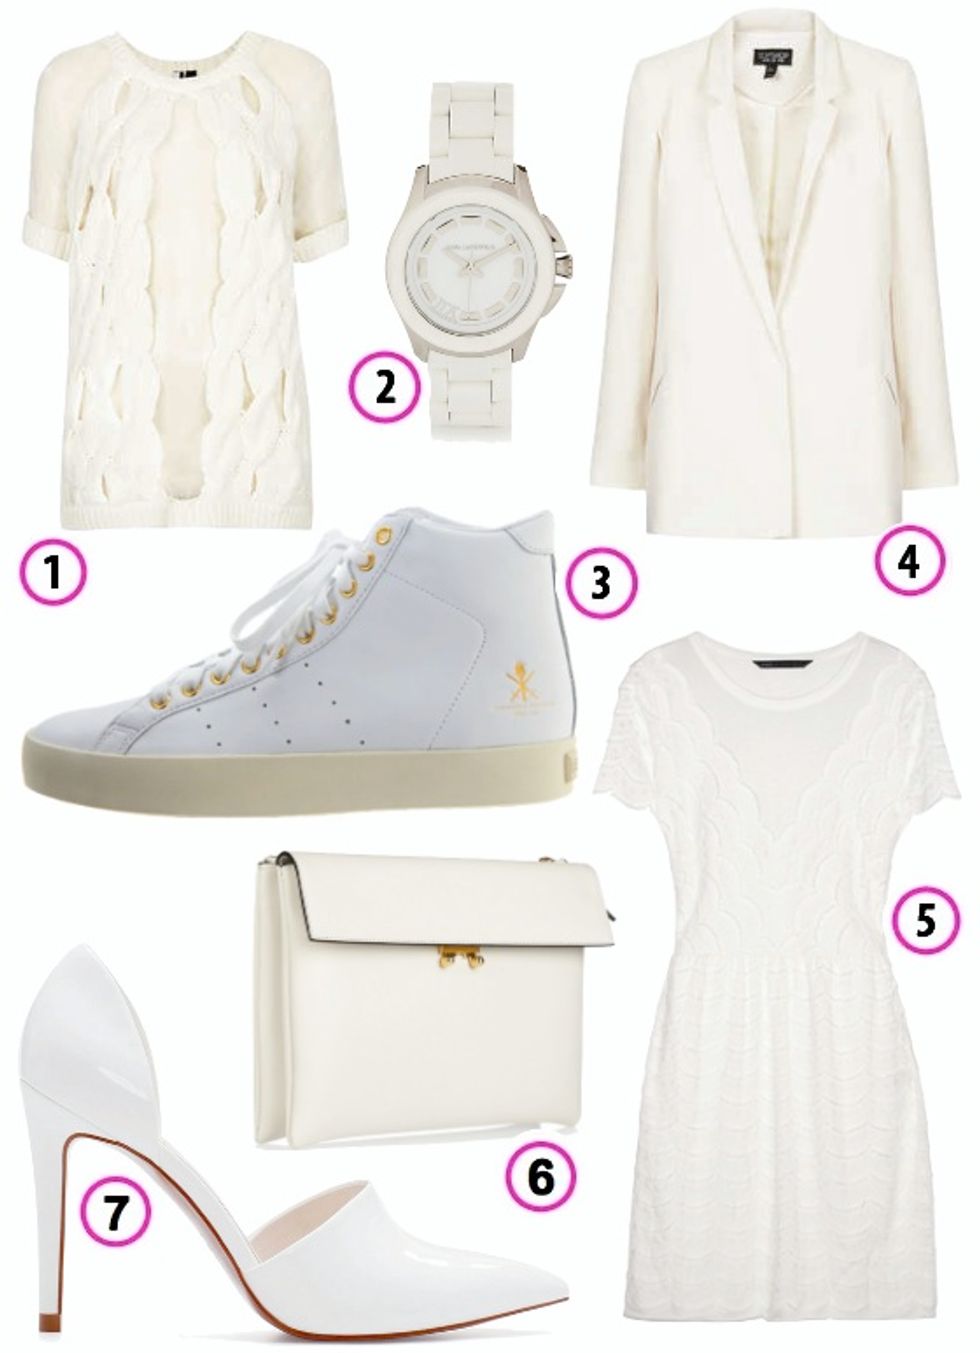 Look of the Week: Great (Post Labor Day) Whites